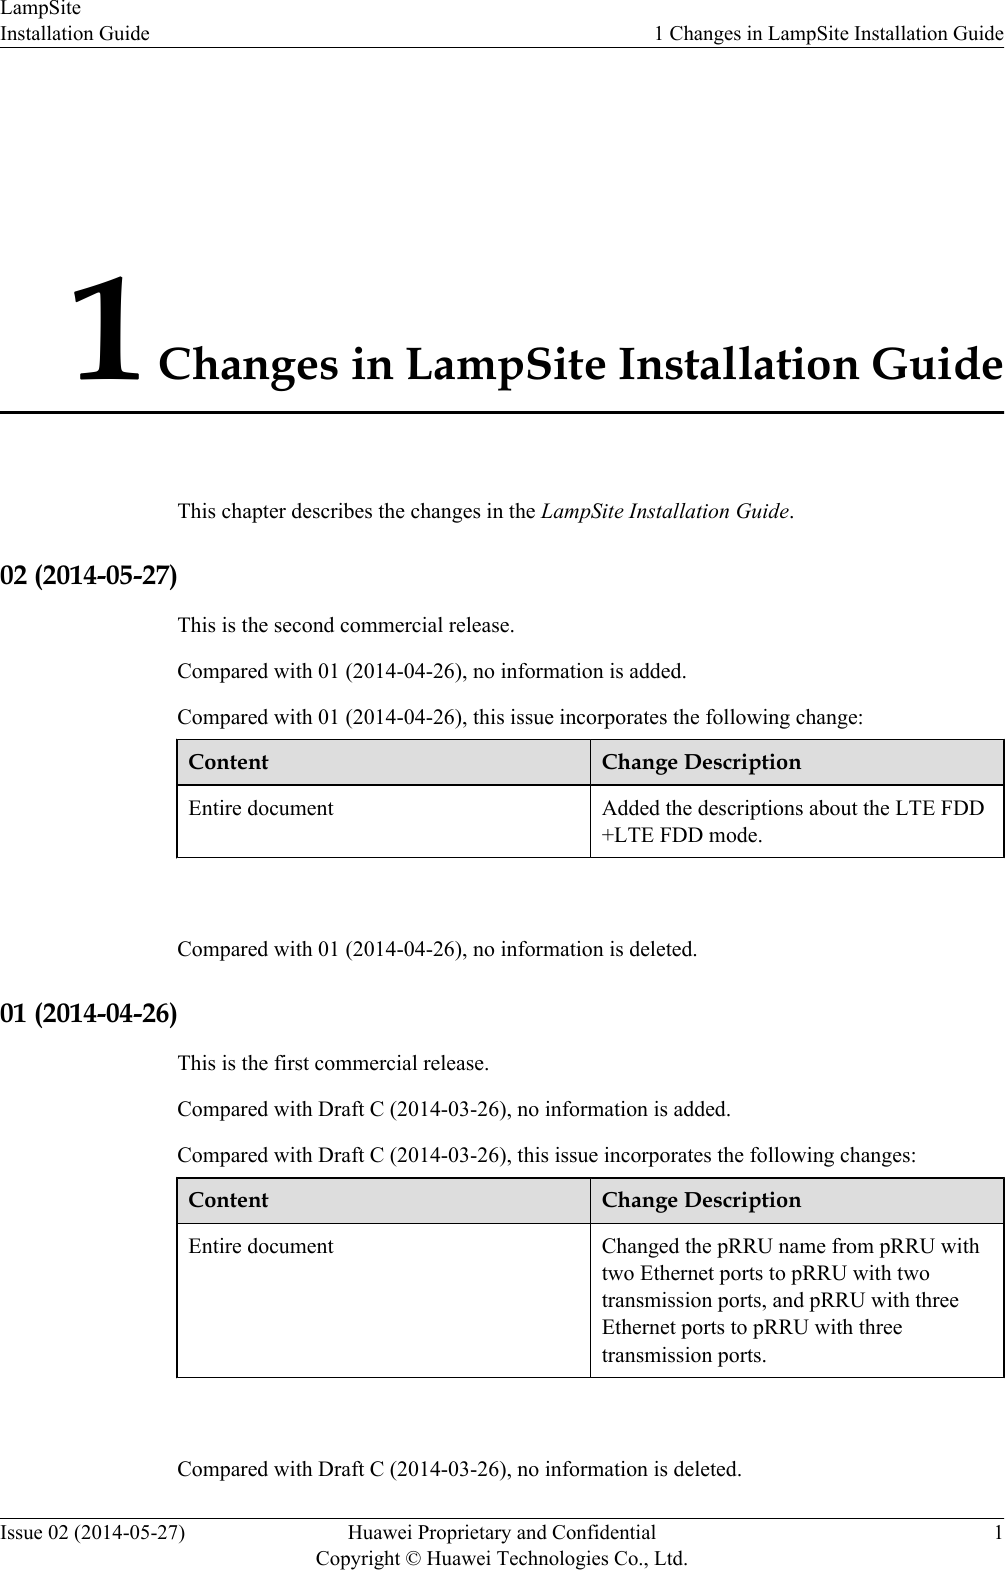 1 Changes in LampSite Installation GuideThis chapter describes the changes in the LampSite Installation Guide.02 (2014-05-27)This is the second commercial release.Compared with 01 (2014-04-26), no information is added.Compared with 01 (2014-04-26), this issue incorporates the following change:Content Change DescriptionEntire document Added the descriptions about the LTE FDD+LTE FDD mode. Compared with 01 (2014-04-26), no information is deleted.01 (2014-04-26)This is the first commercial release.Compared with Draft C (2014-03-26), no information is added.Compared with Draft C (2014-03-26), this issue incorporates the following changes:Content Change DescriptionEntire document Changed the pRRU name from pRRU withtwo Ethernet ports to pRRU with twotransmission ports, and pRRU with threeEthernet ports to pRRU with threetransmission ports. Compared with Draft C (2014-03-26), no information is deleted.LampSiteInstallation Guide 1 Changes in LampSite Installation GuideIssue 02 (2014-05-27) Huawei Proprietary and ConfidentialCopyright © Huawei Technologies Co., Ltd.1